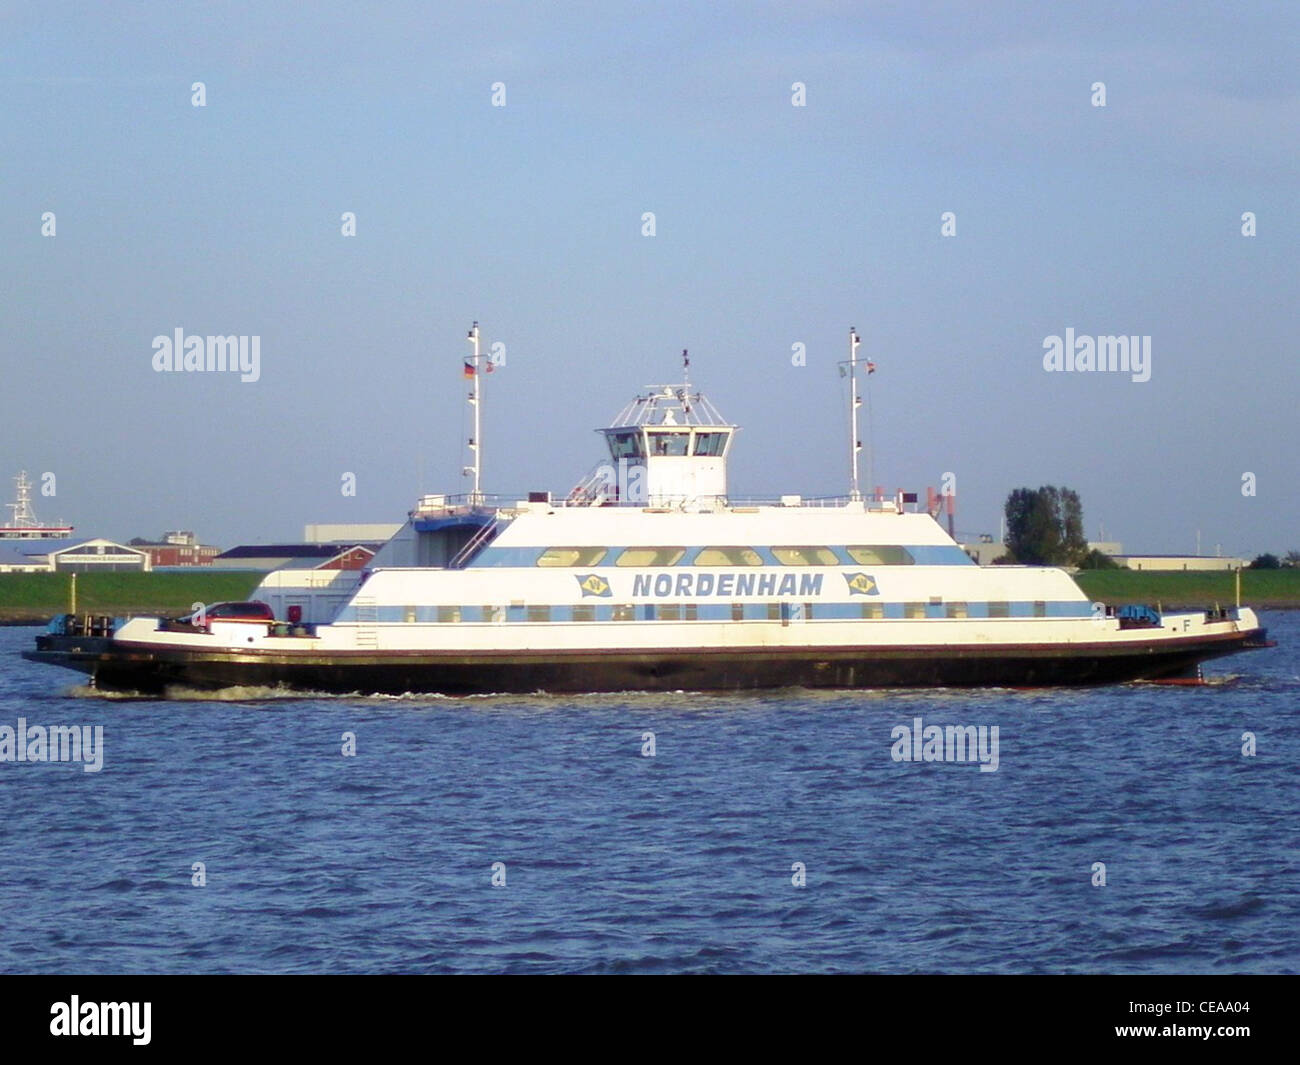 The ferry Nordenham on the River Weser connecting Bremerhaven and Nordenham Stock Photo